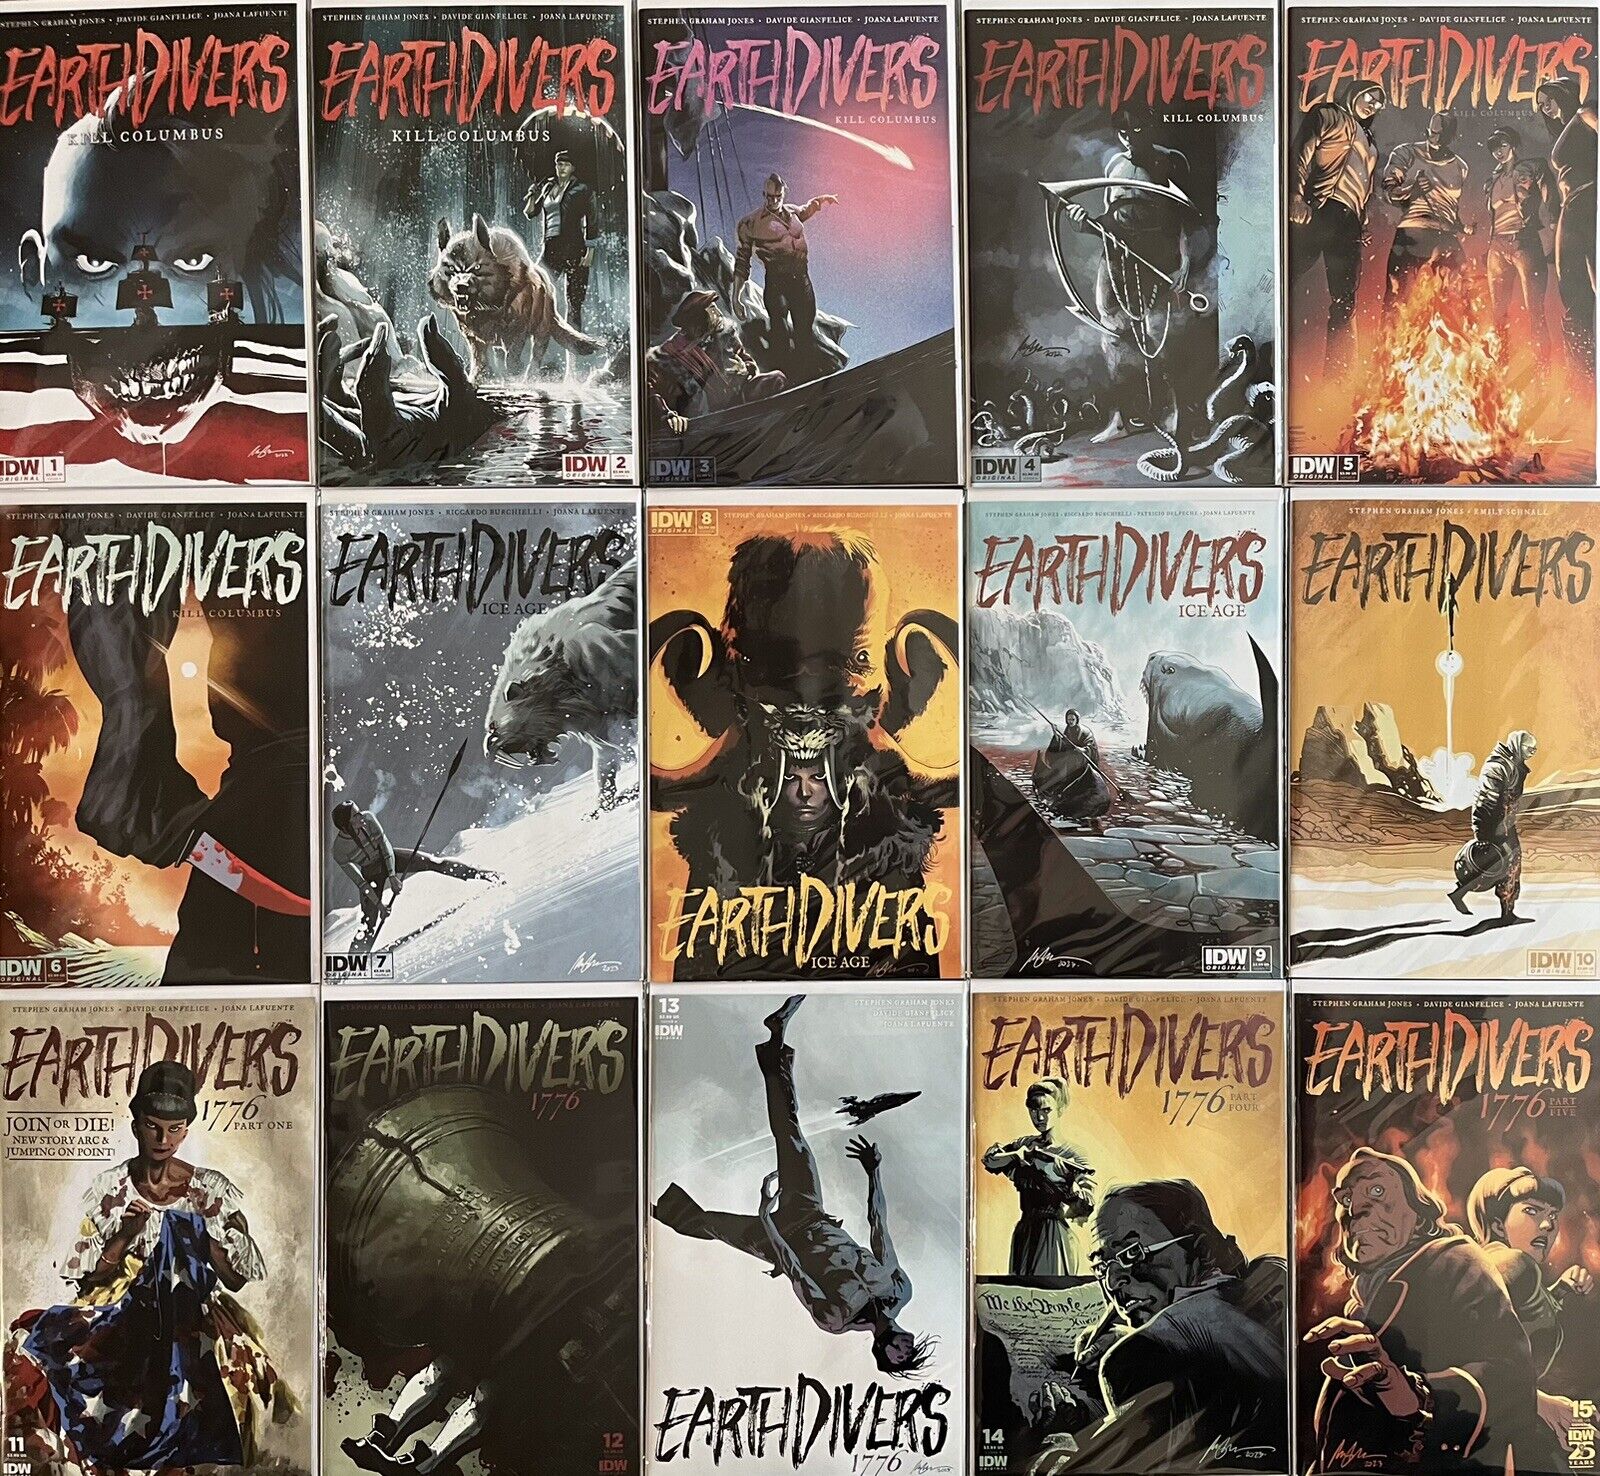 Earthdivers (2022 Series) # 1 - 16 Complete Series Run - IDW Comics